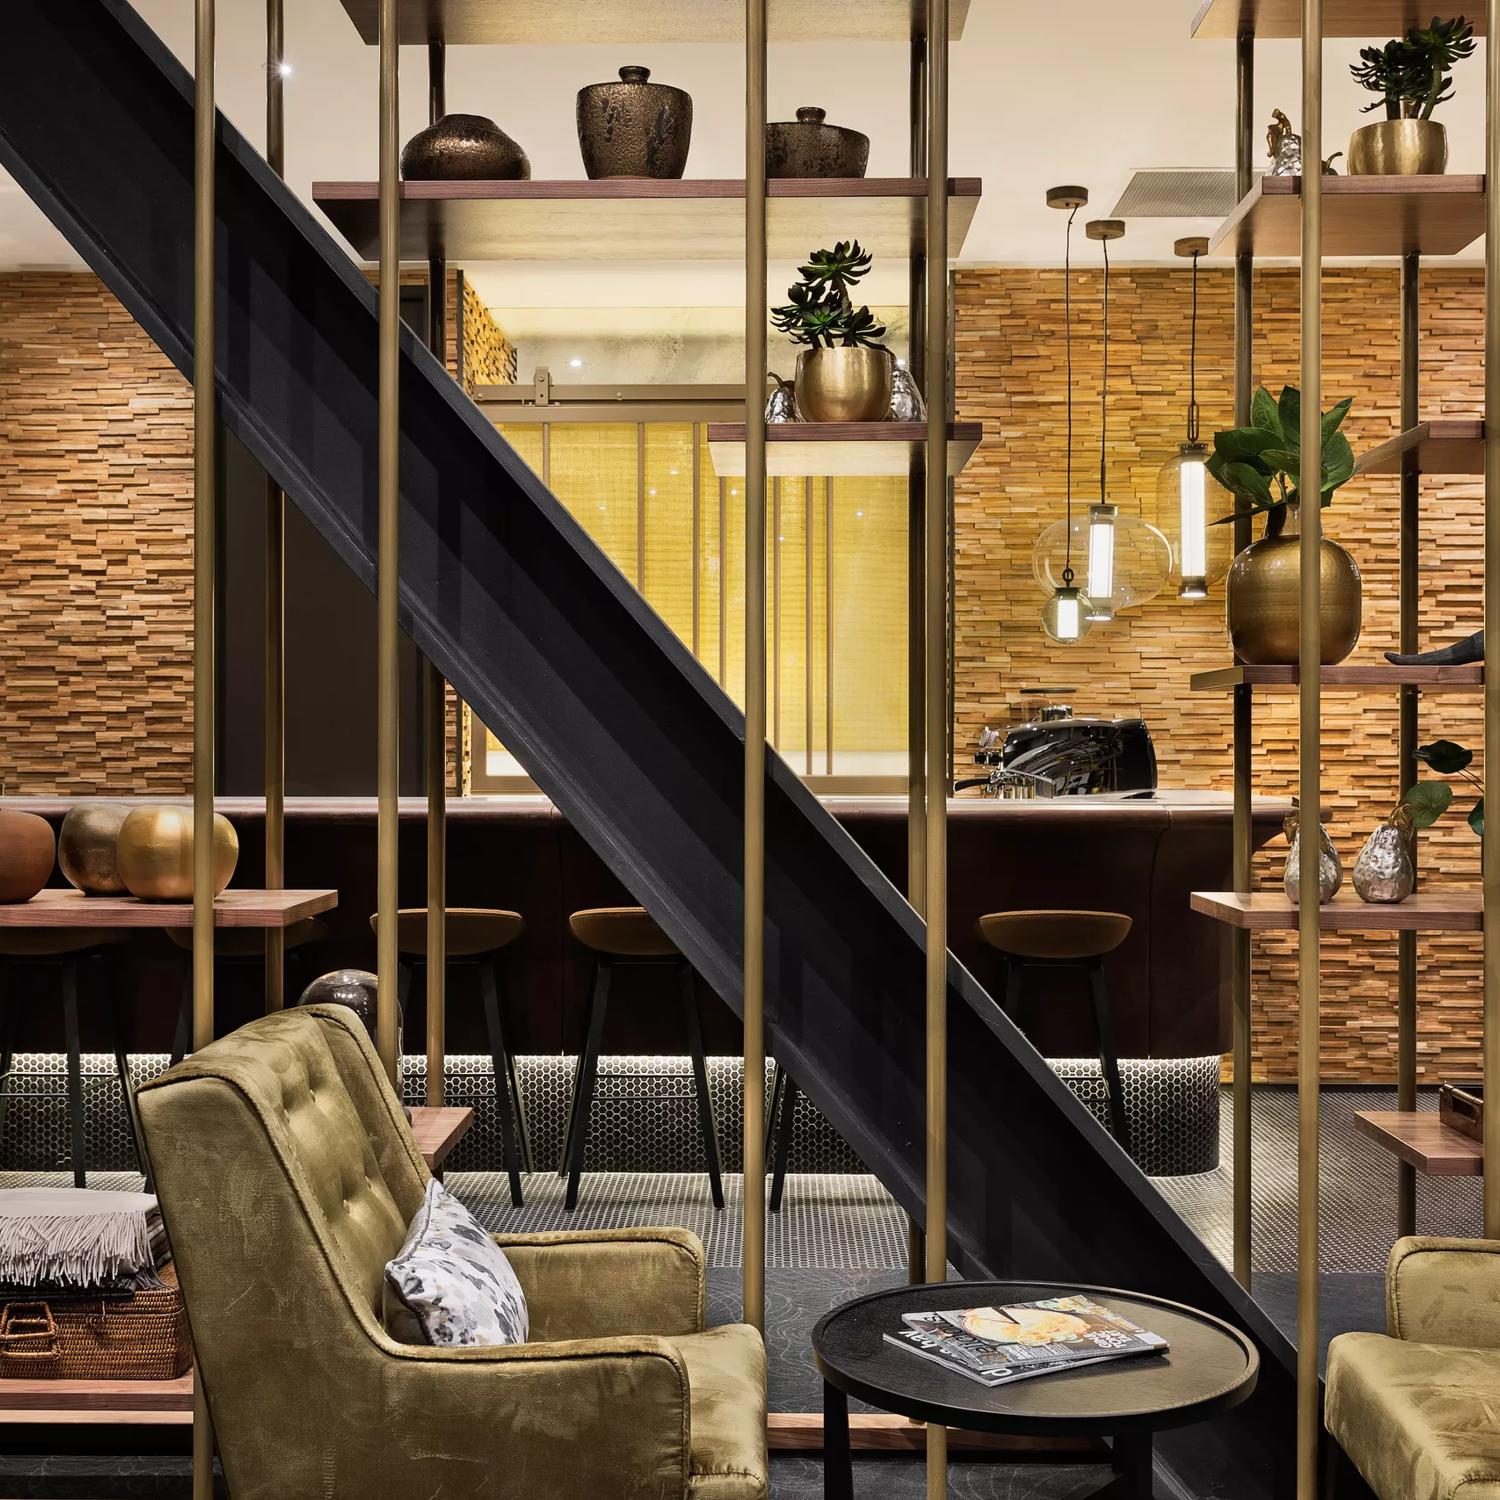 Inside Sofitel's hotel bar in Wellington, there are two olive green armchairs and a small black coffee table adorned with two magazines. The room also features decorative floating shelves, a diagonal black beam, and a bar equipped with six stools.